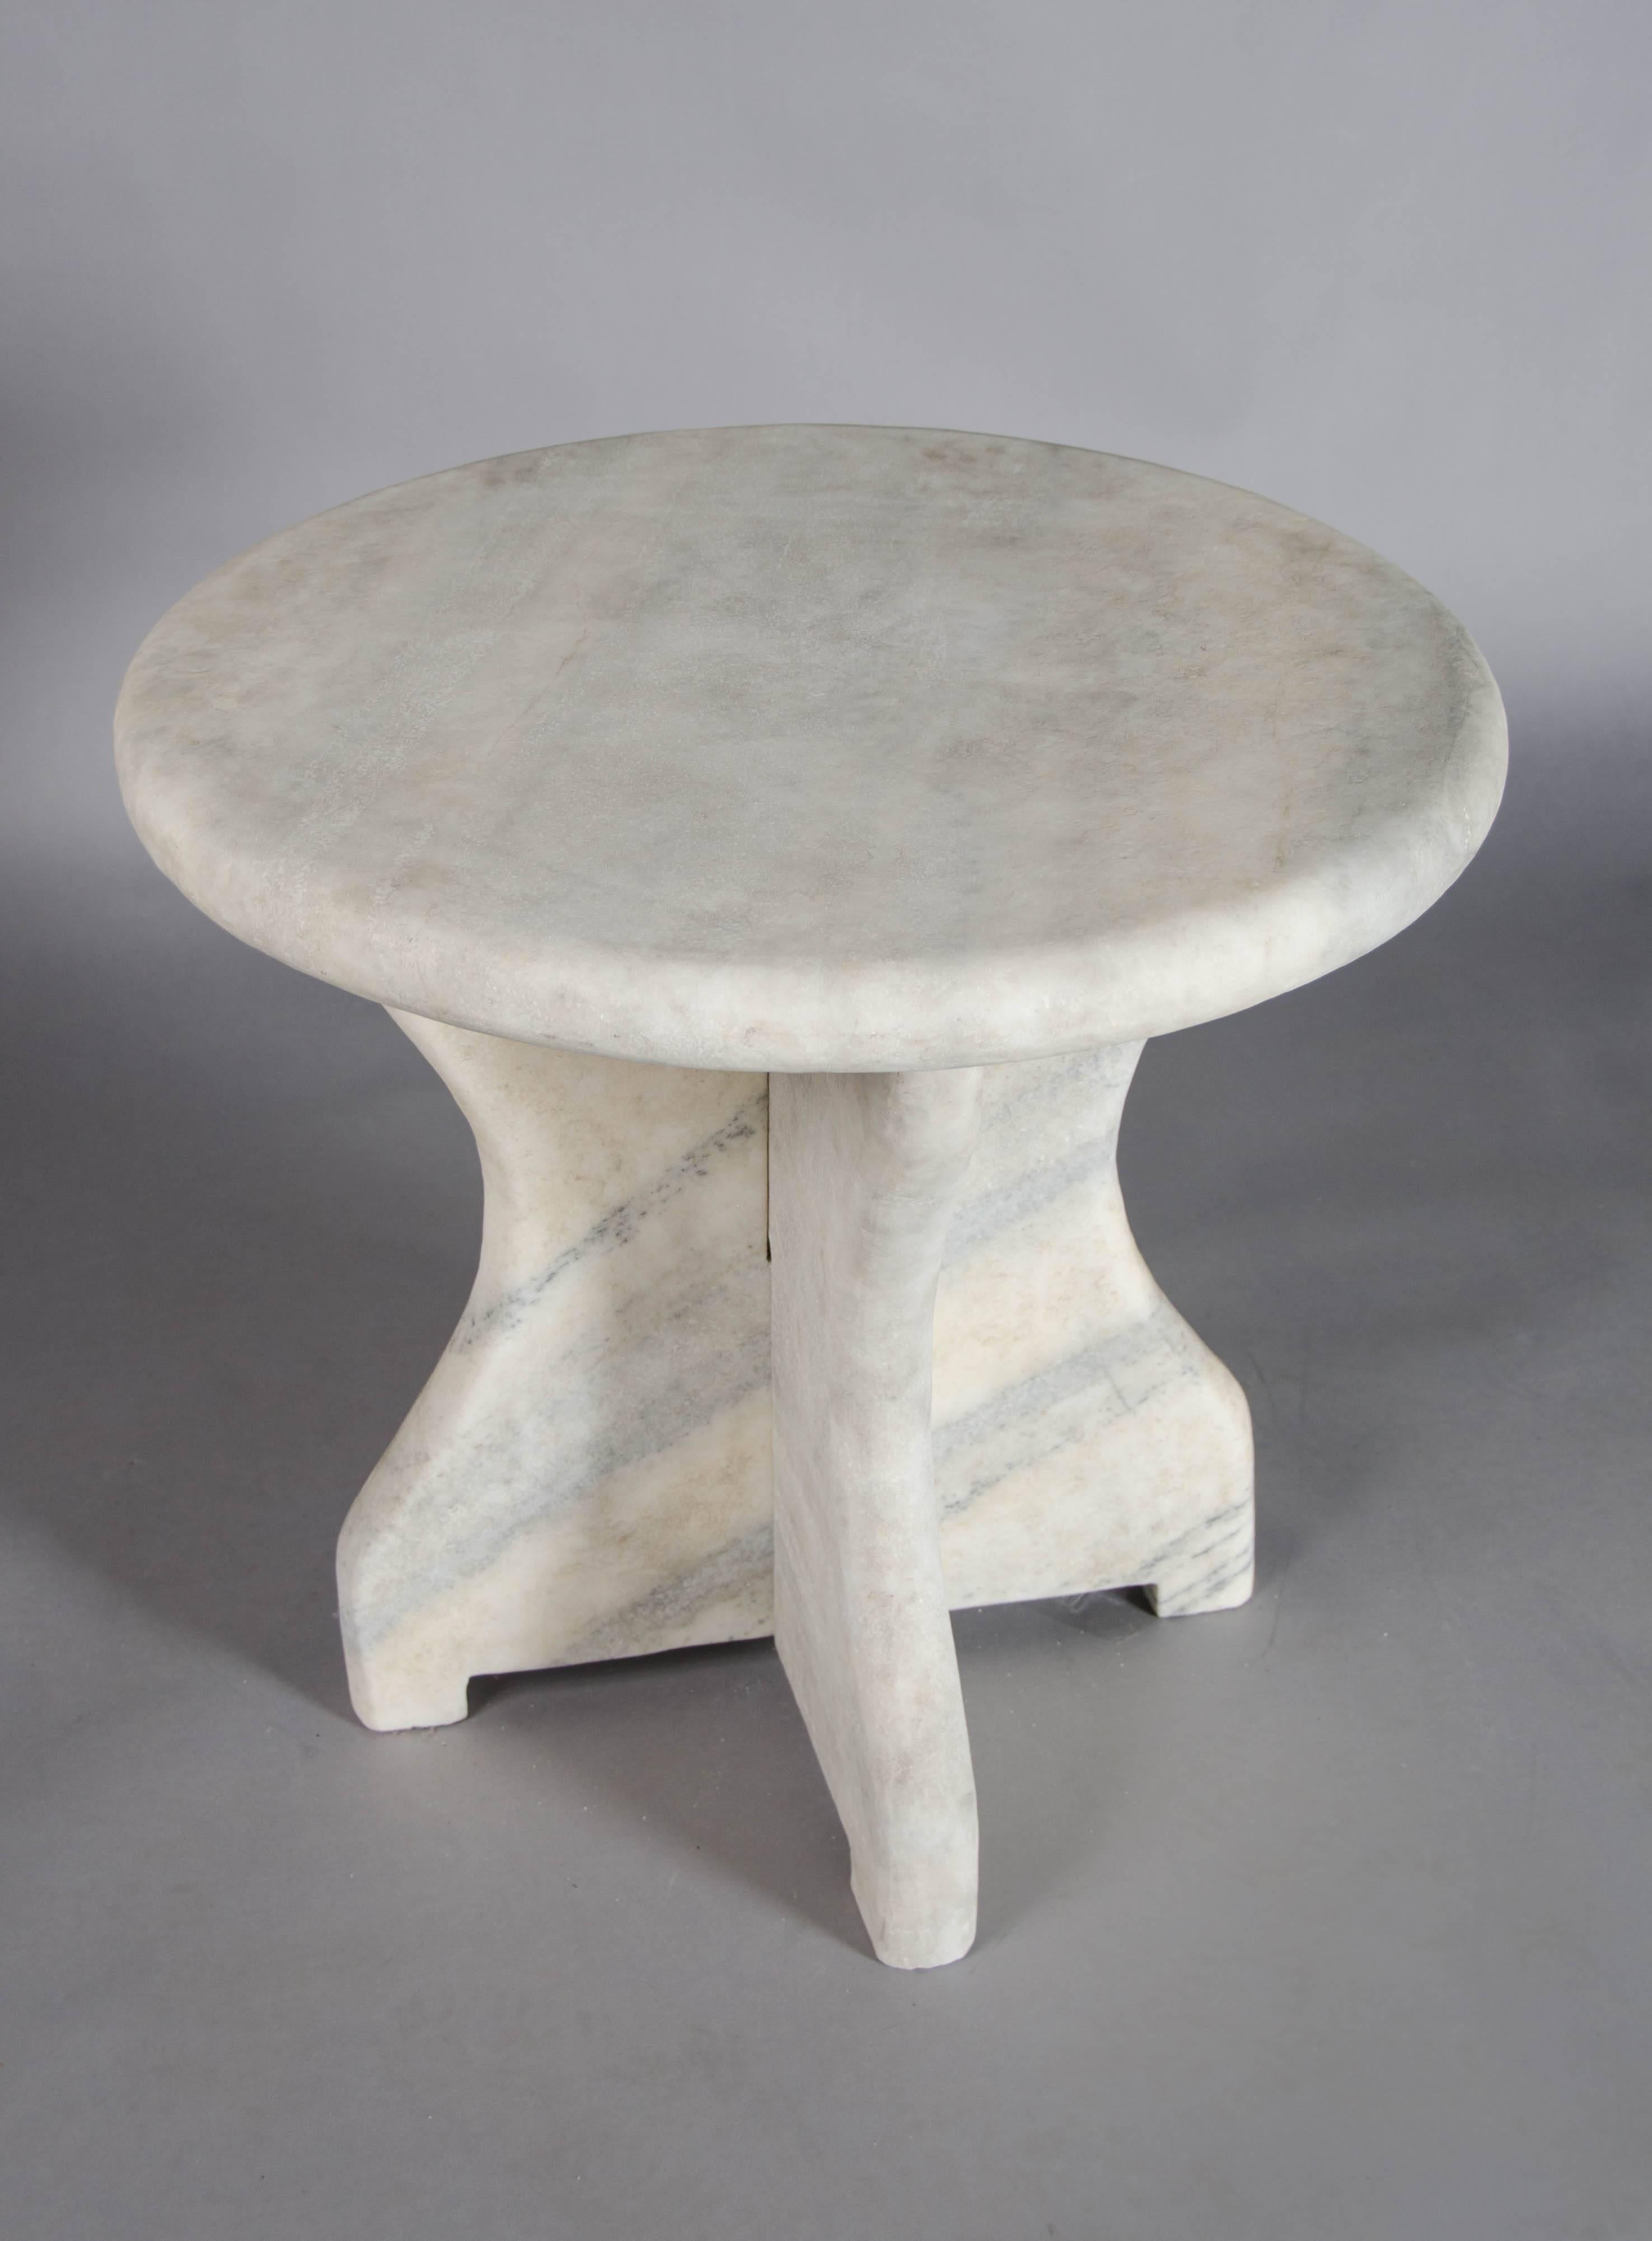 Hand-Carved Stone Mallet Design Table by Robert Kuo, Limited Edition